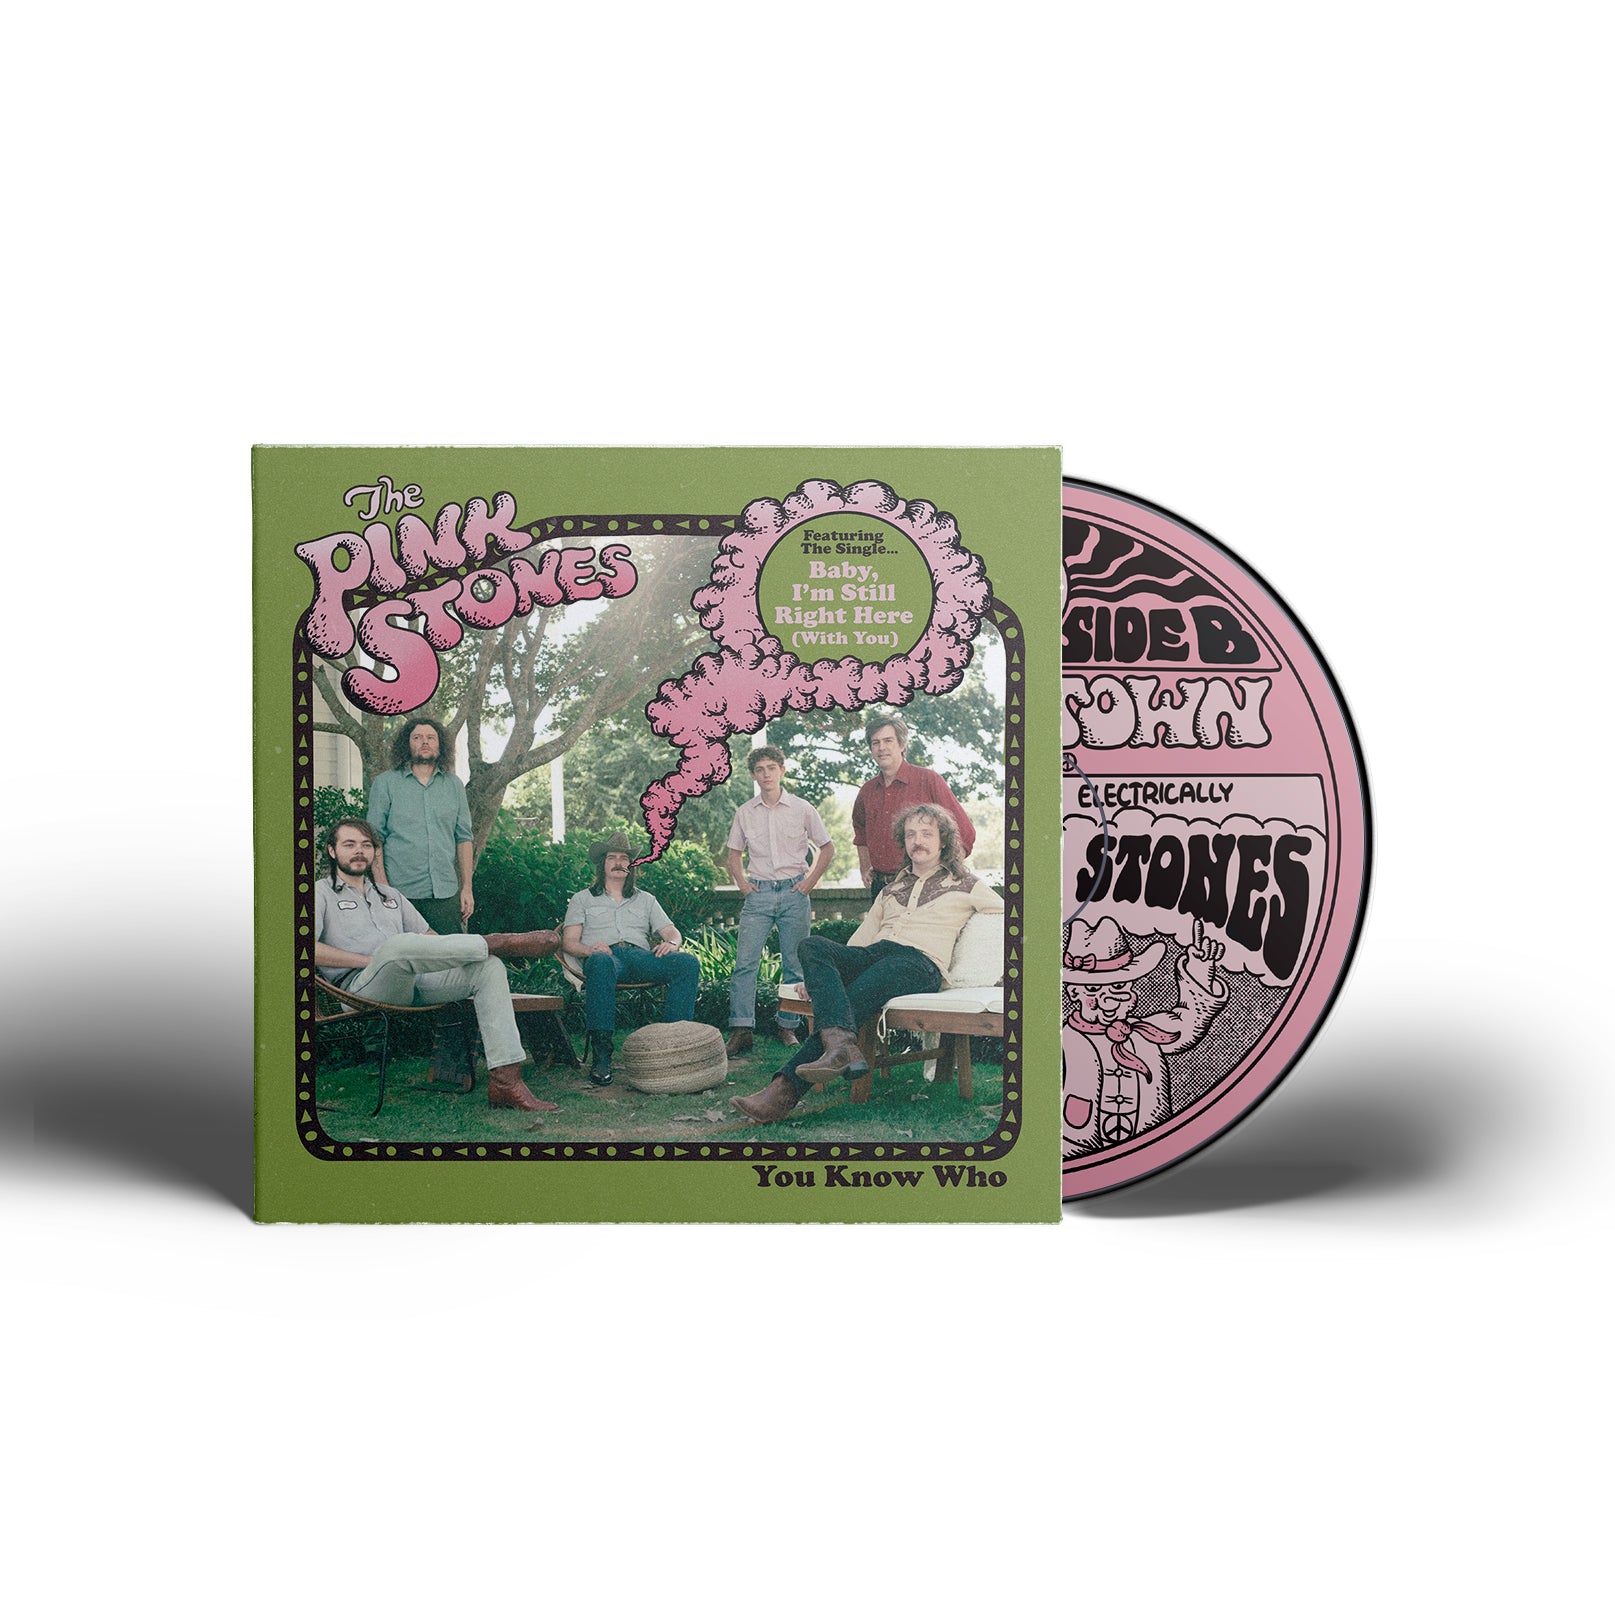 The Pink Stones - You Know Who [CD]